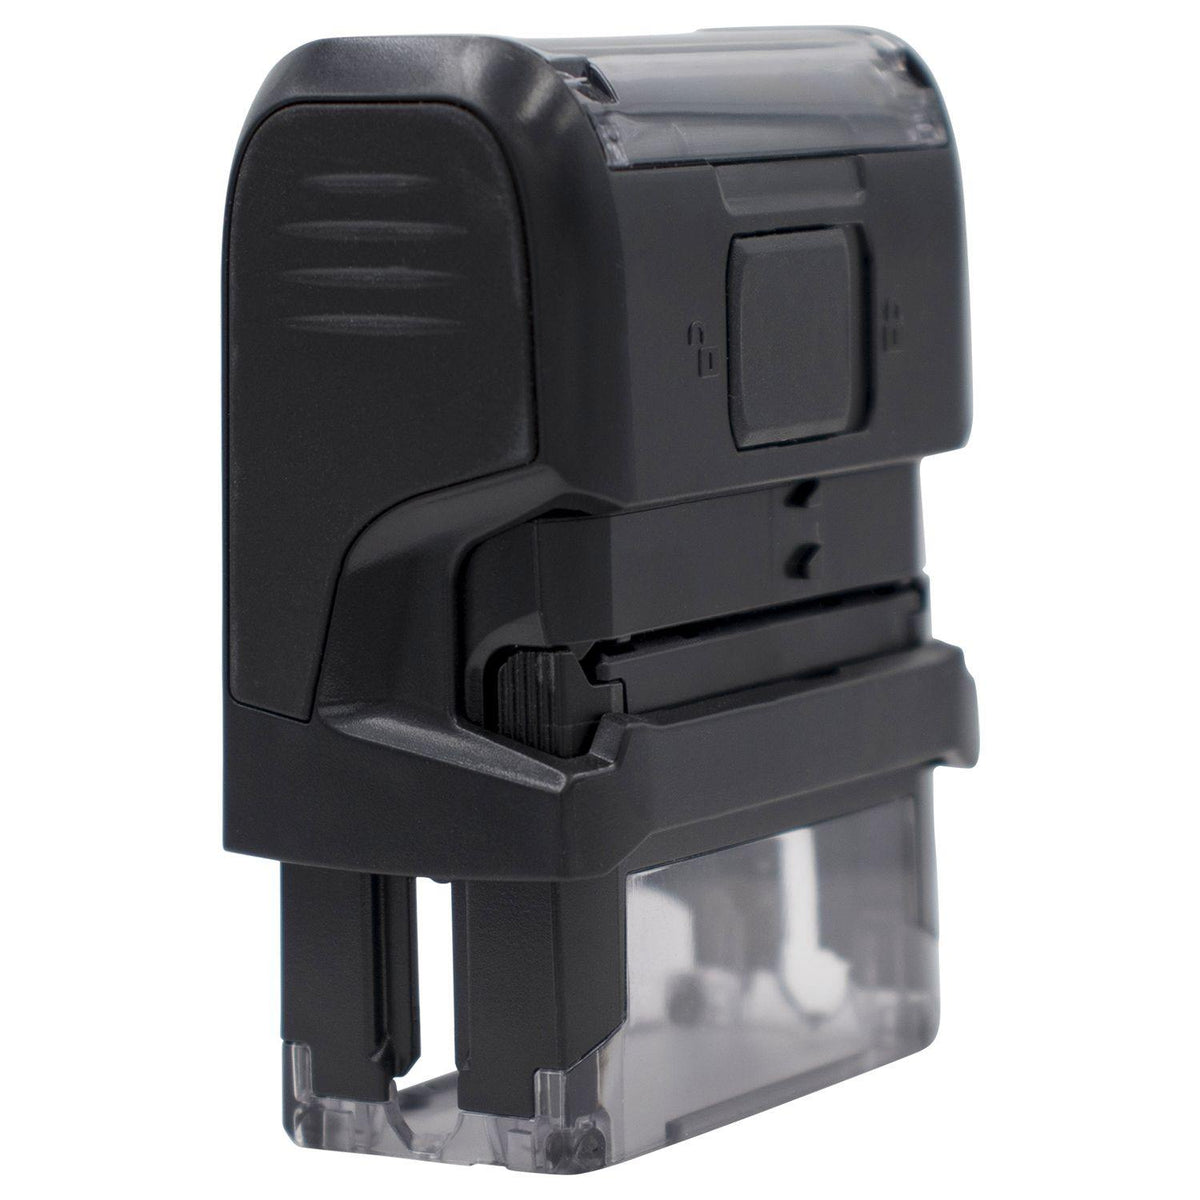 Self-Inking Special Handling Stamp - Engineer Seal Stamps - Brand_Trodat, Impression Size_Small, Stamp Type_Self-Inking Stamp, Type of Use_Postal &amp; Mailing, Type of Use_Shipping &amp; Receiving